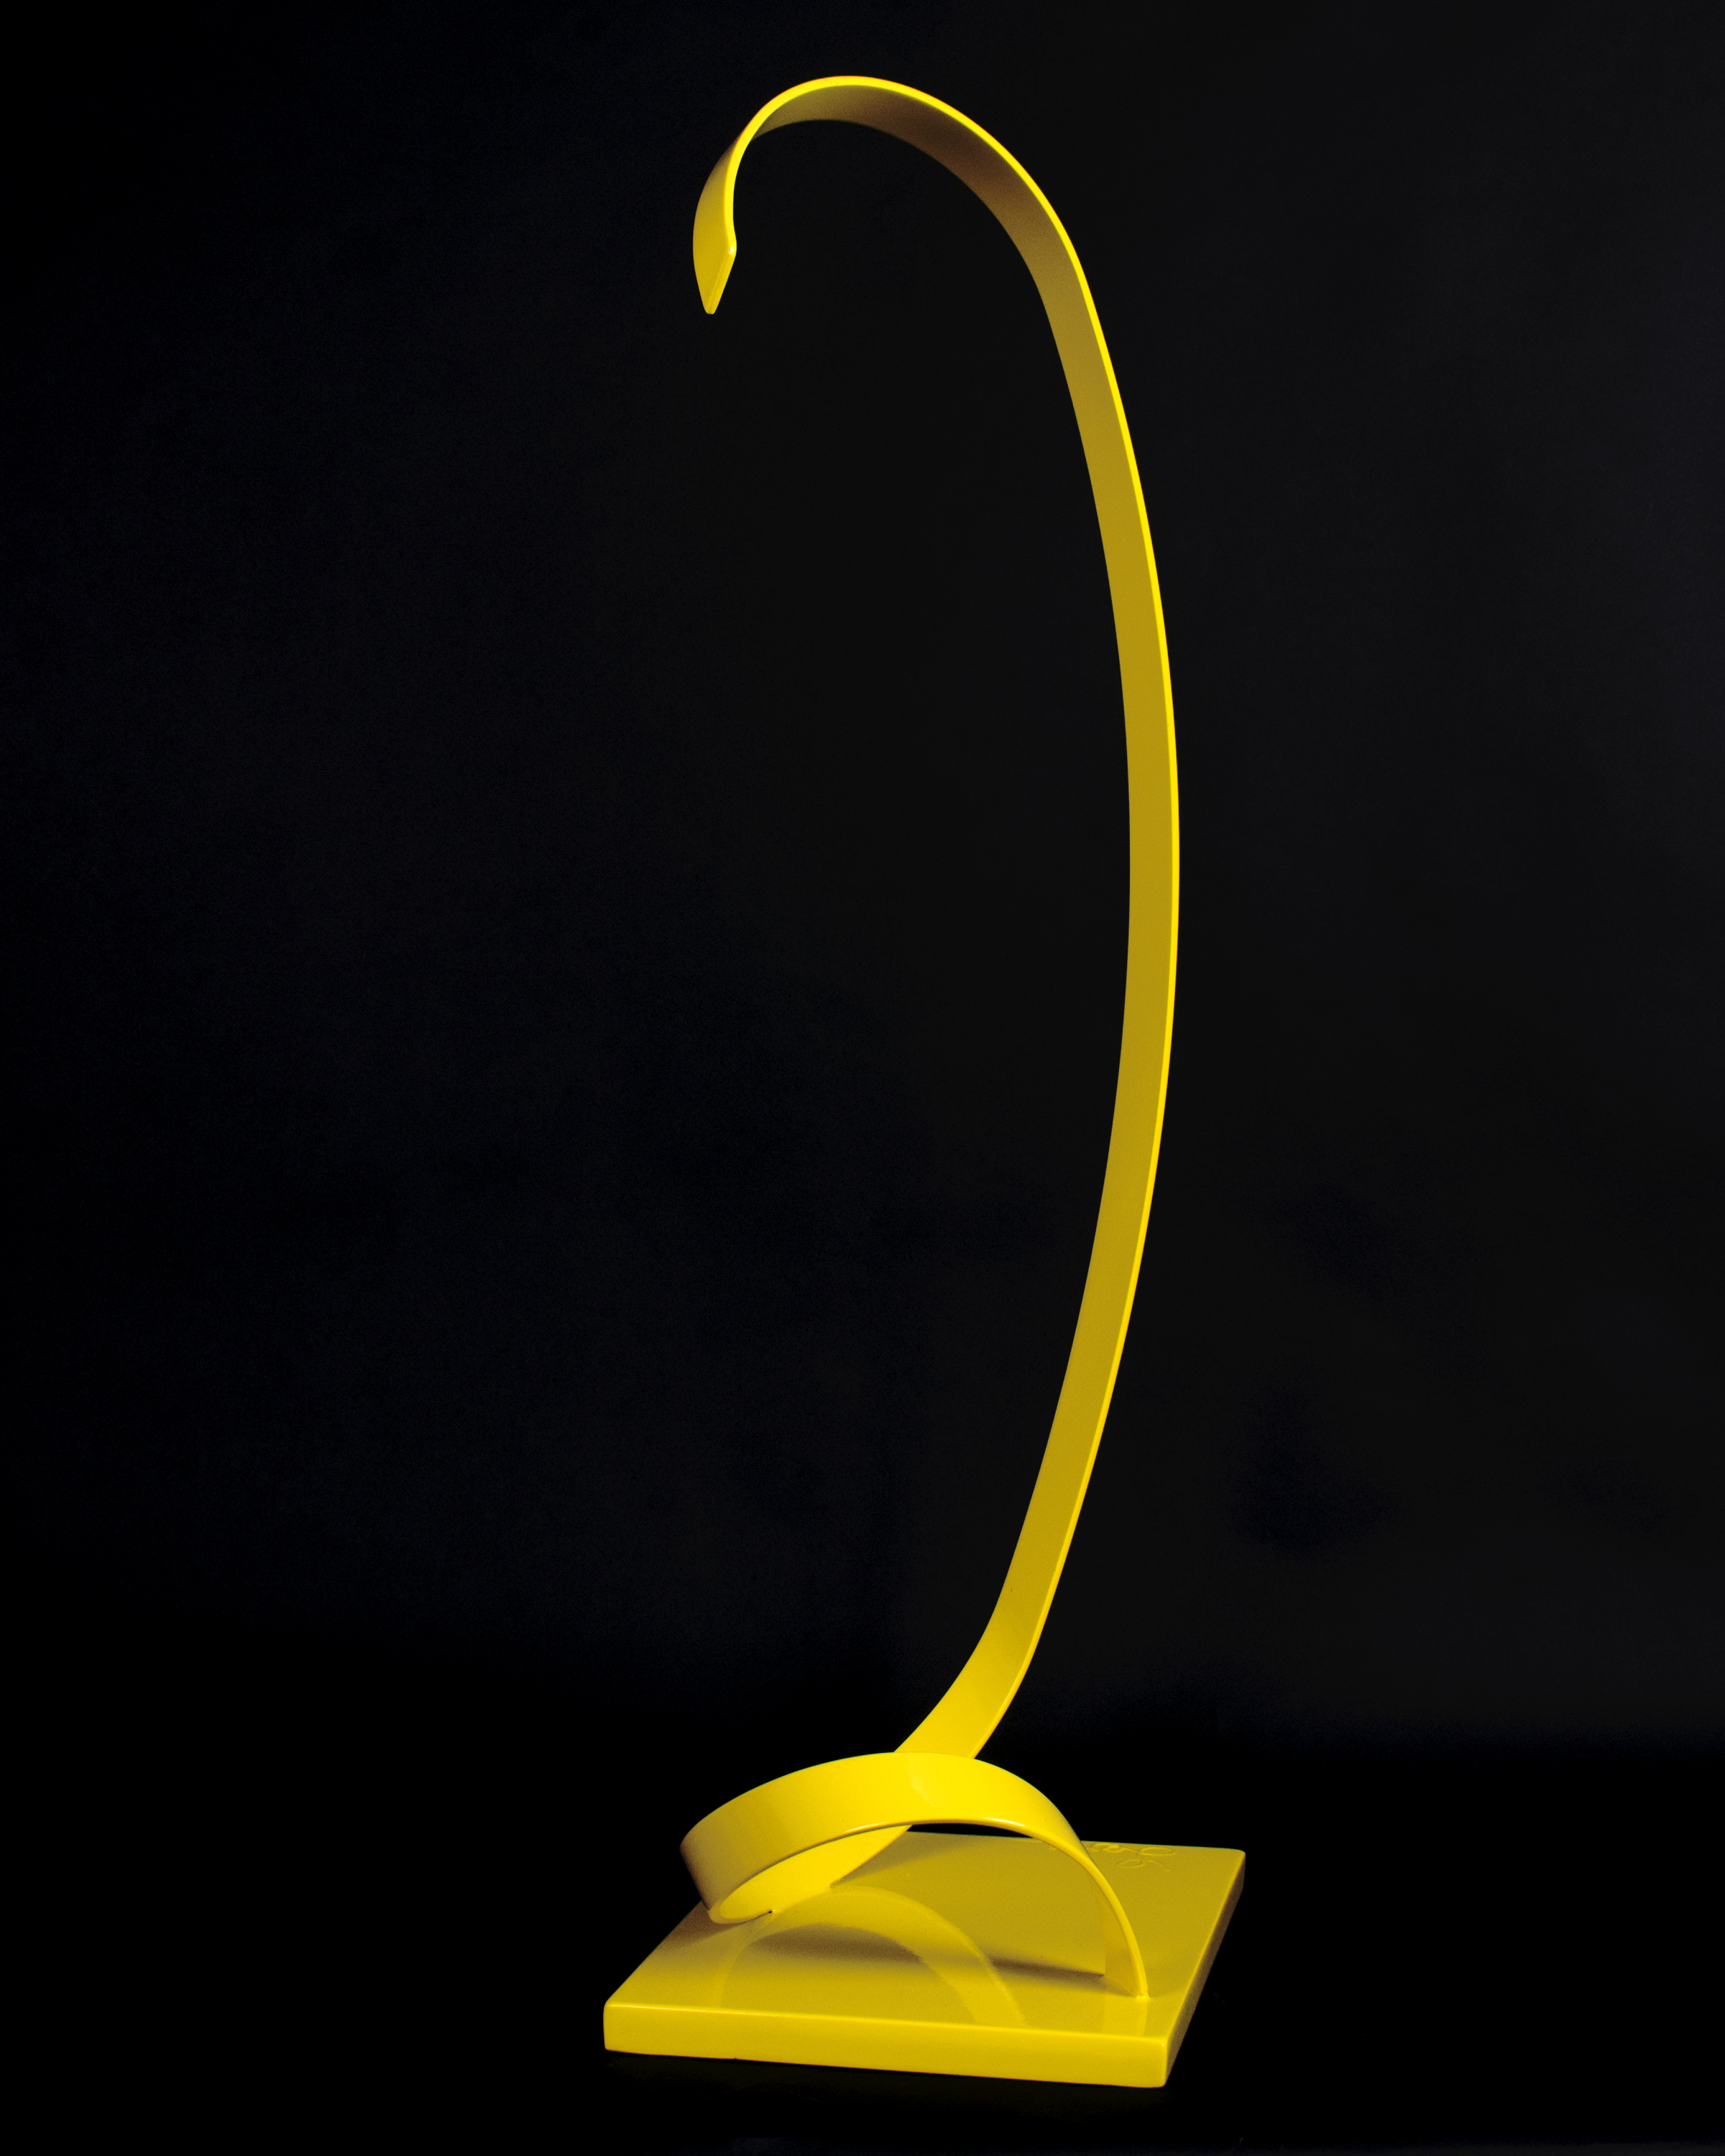 Yellow Ribbon, 2013, painted welded steel, 48 x 14 x 16 in, $10,000